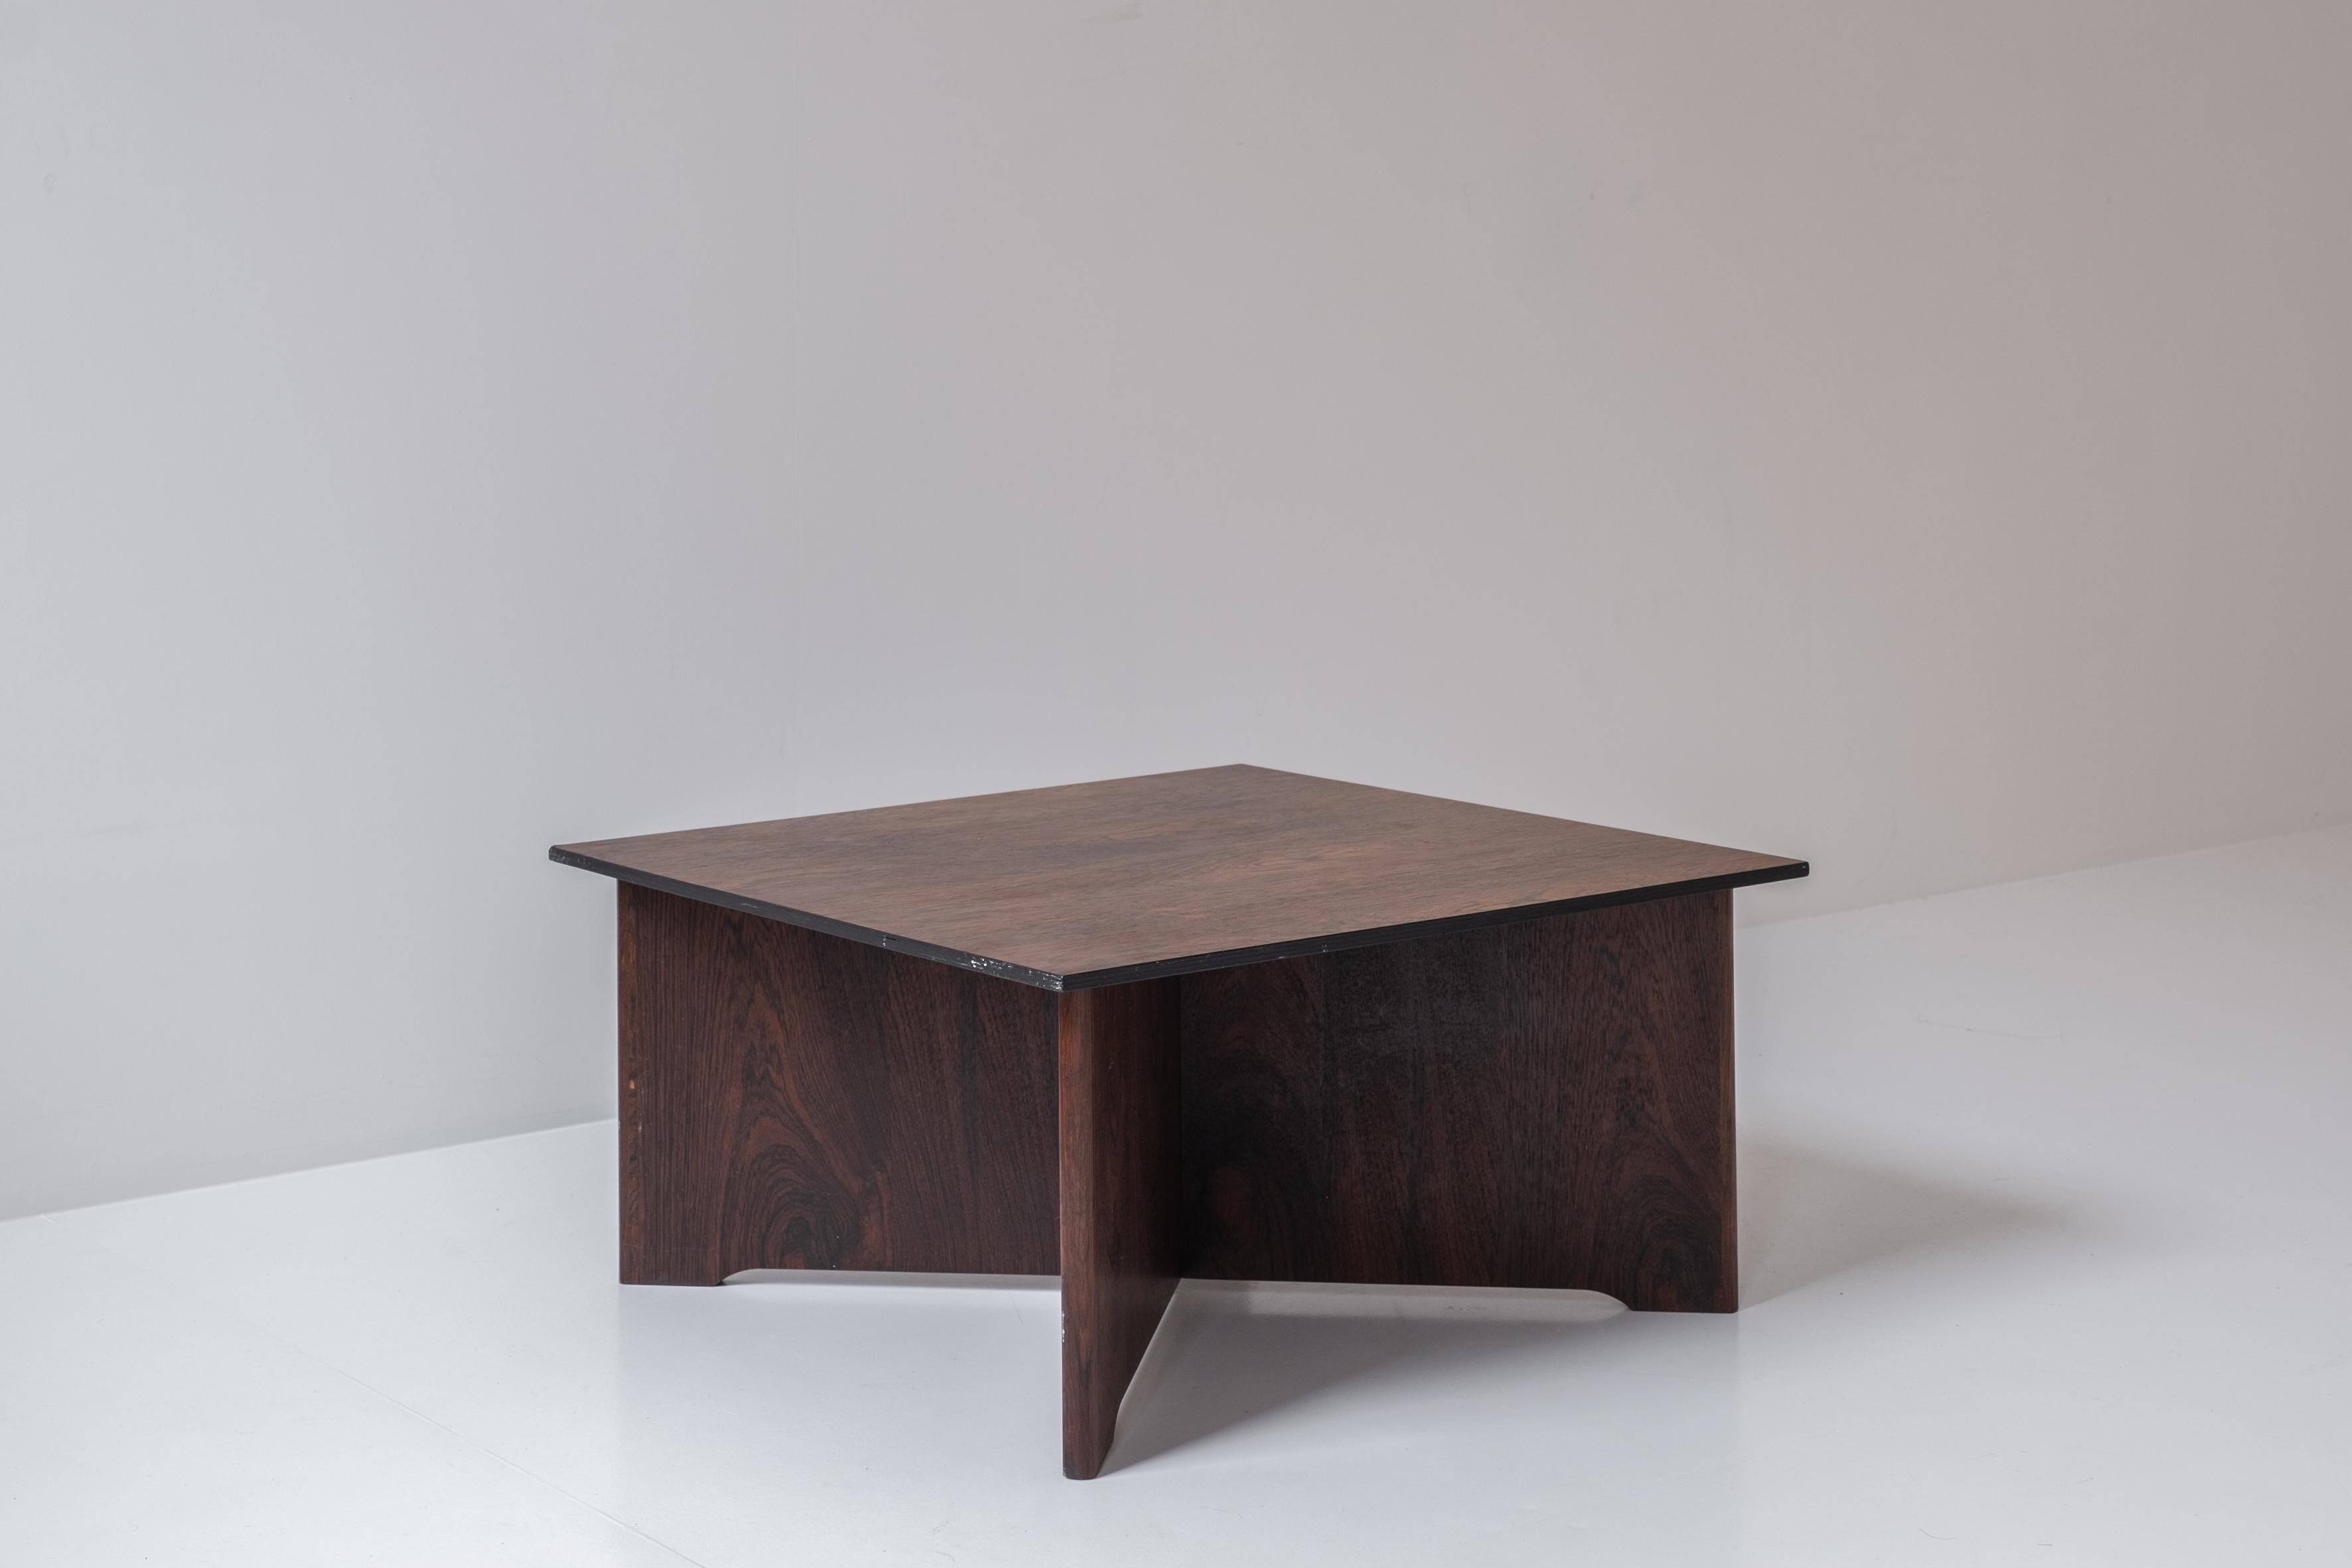 Mid-20th Century Square Coffee Table from Denmark, Designed in the 1960s